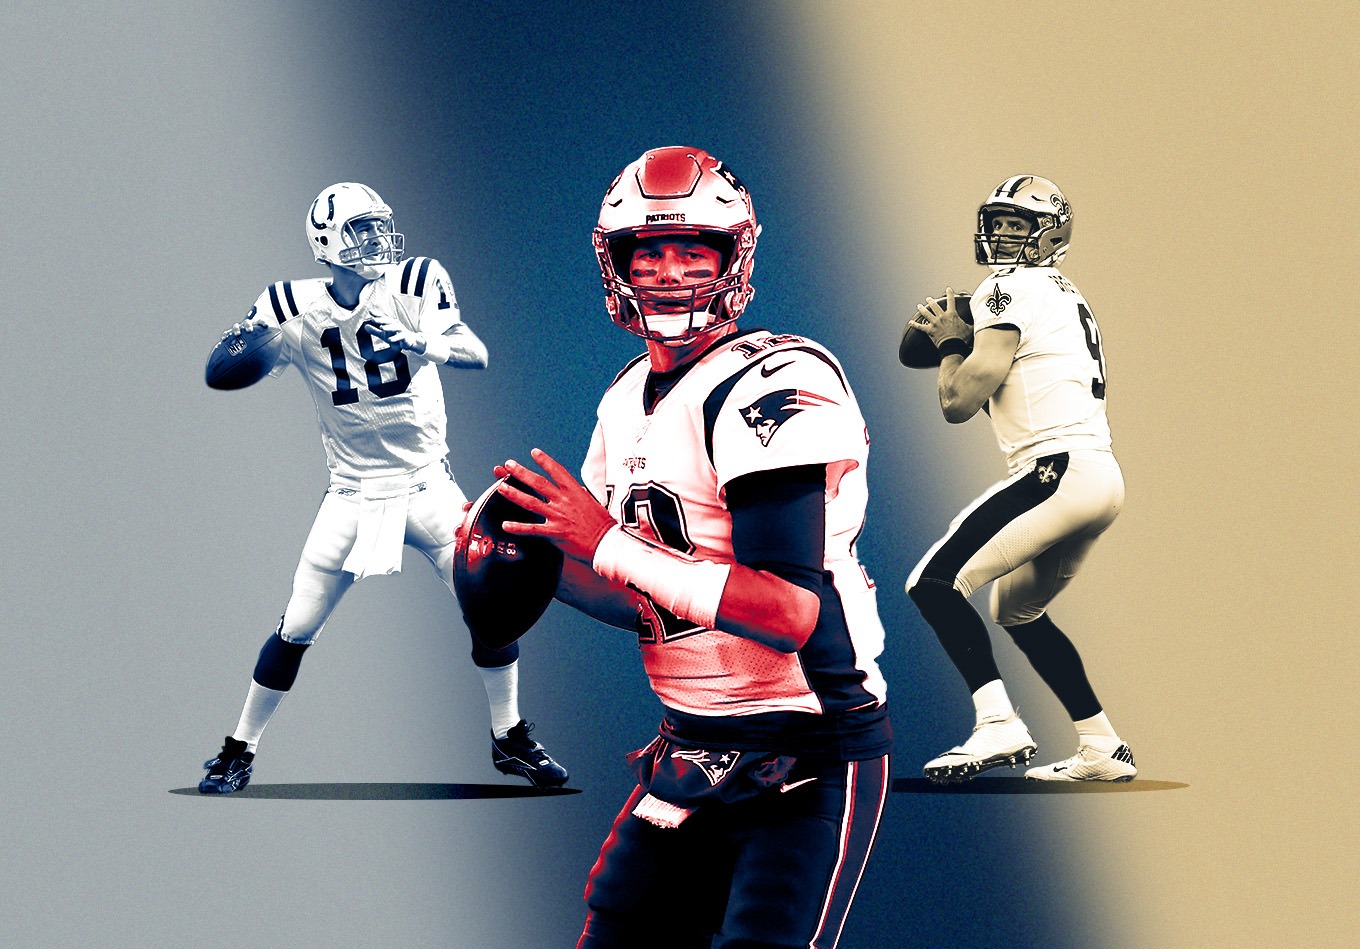 Who Has the Most NFL All-Time Passing Yards?